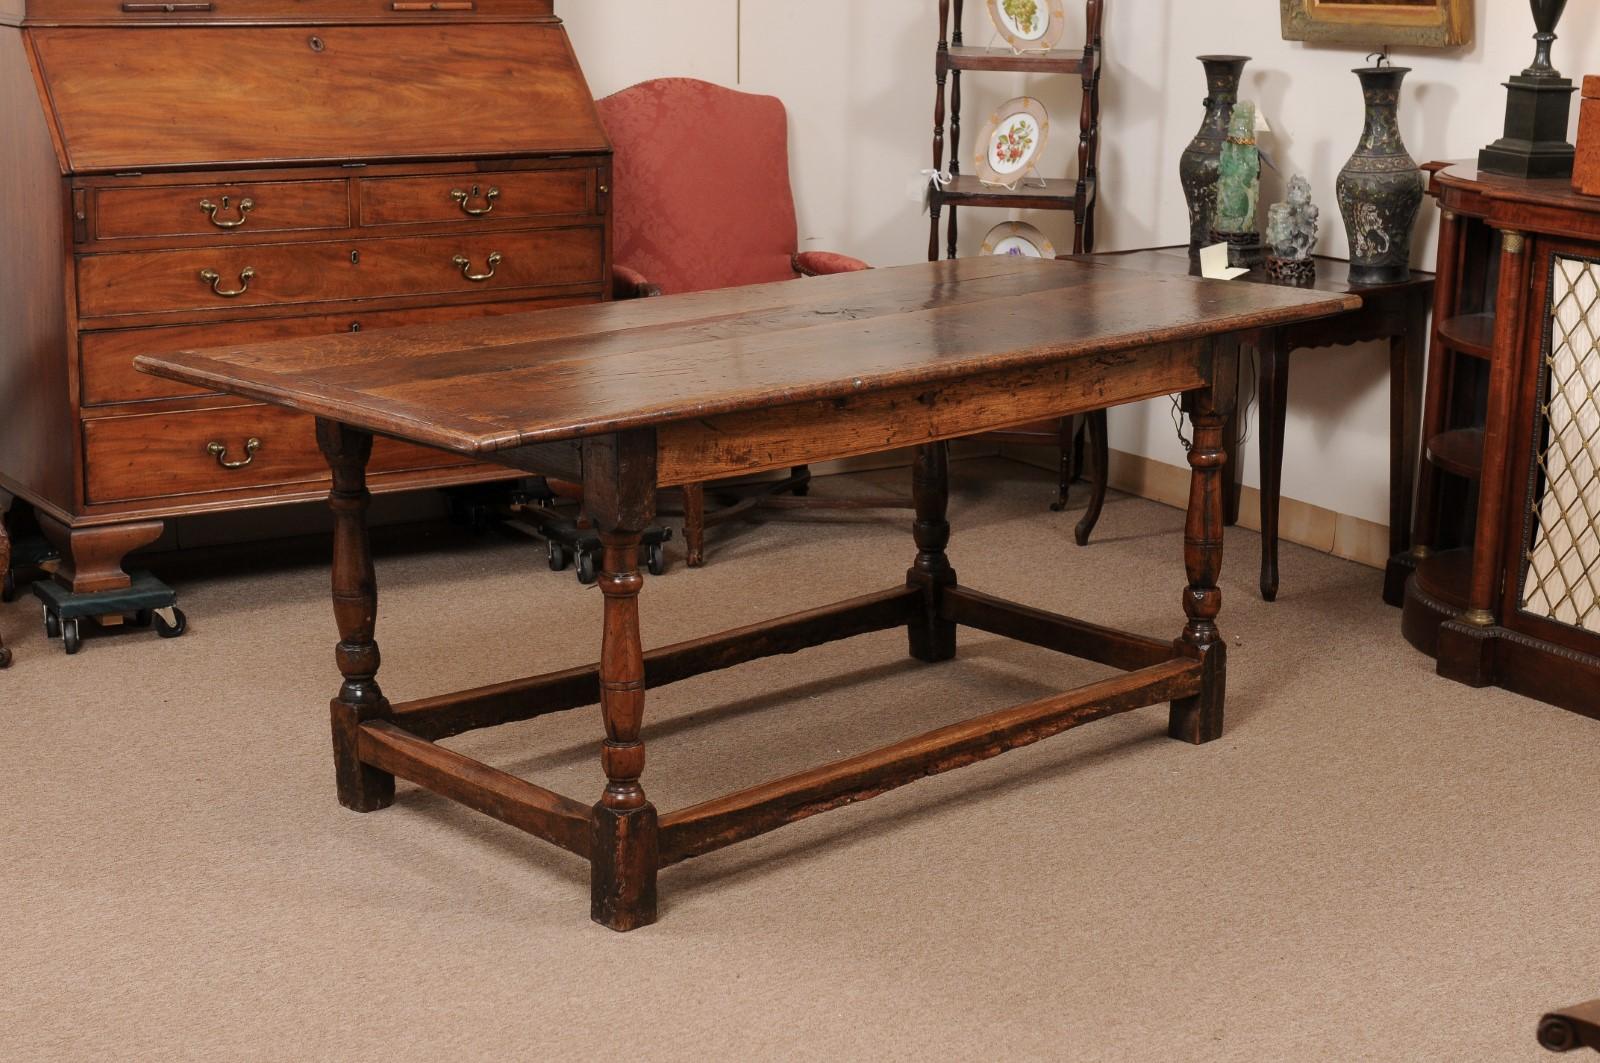  Early 18th Century English Long Oak Hall Table with Carved Frieze, Turned Legs  In Good Condition For Sale In Atlanta, GA